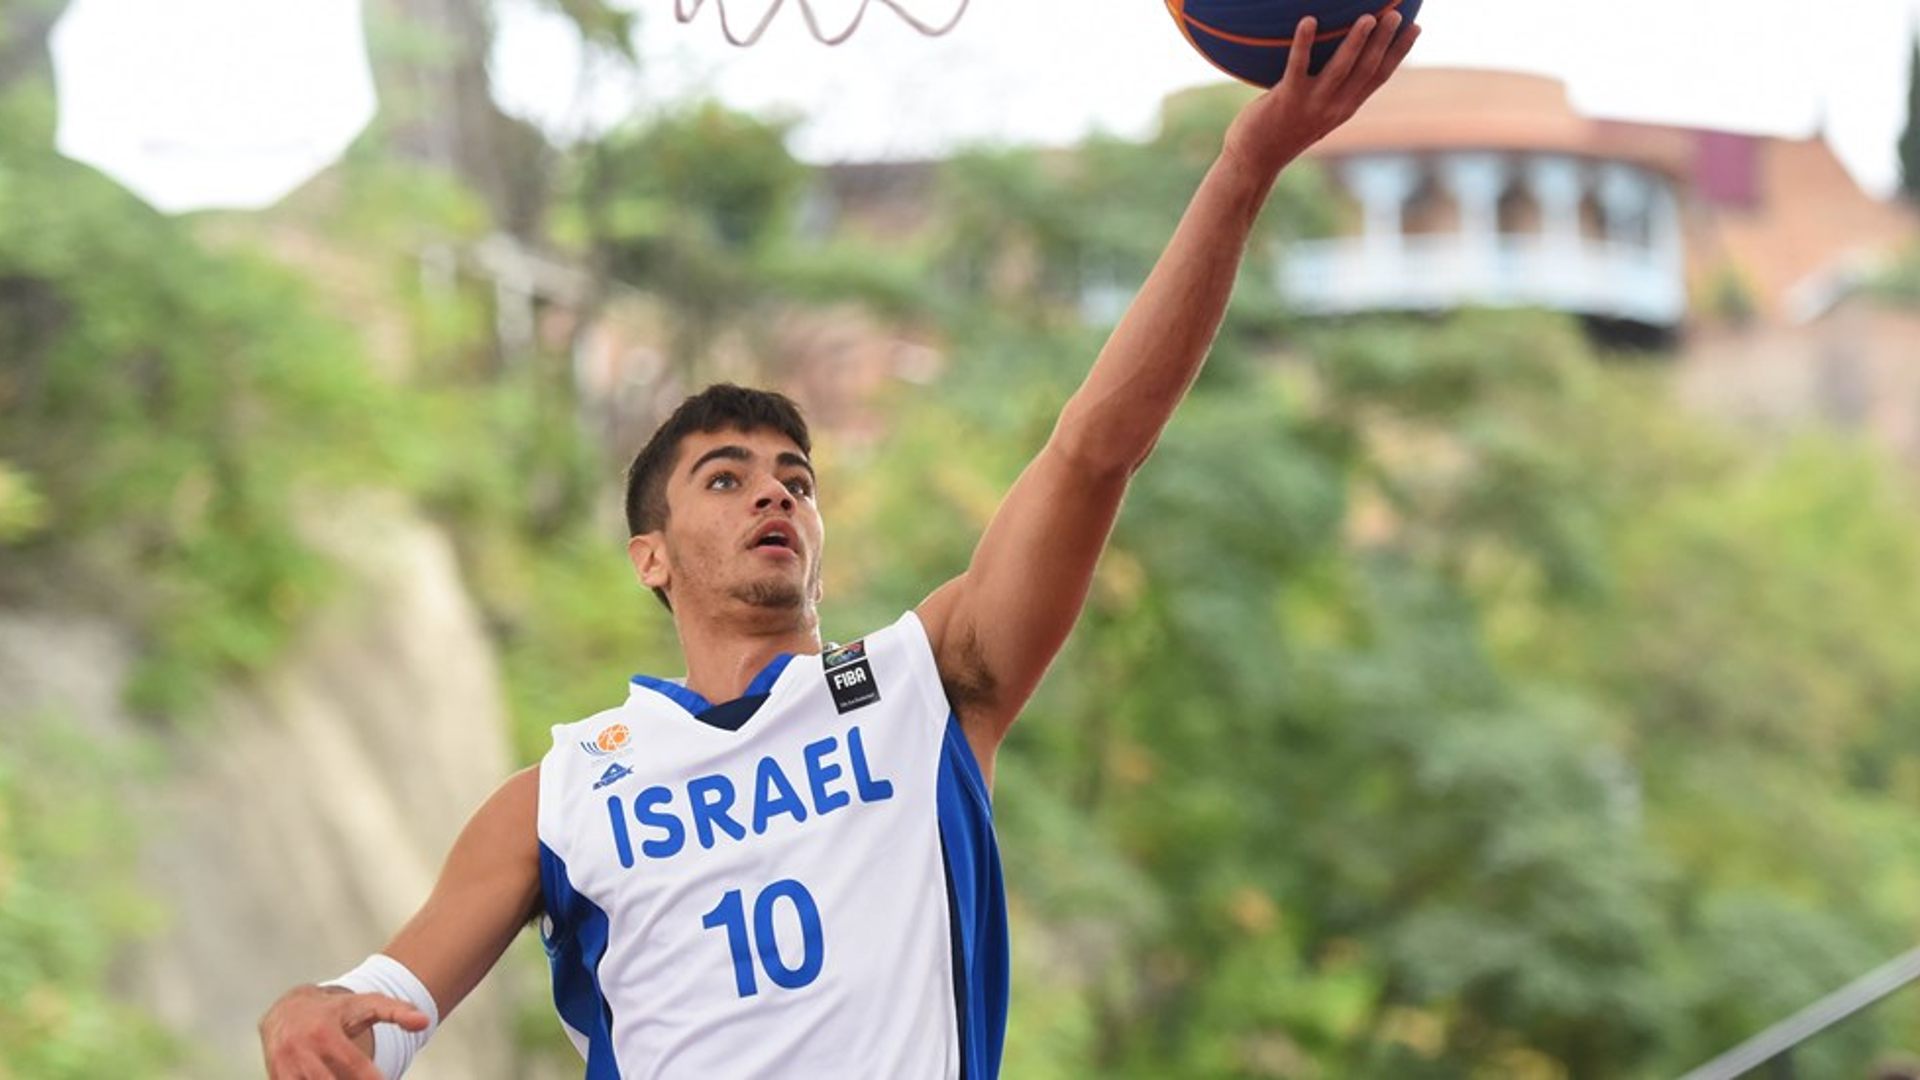 The FIBA European Cup 3x3 match between Serbia vs Israel will be held at Graz on Saturday, September 10 at 8:20 PM (International time), and September 10, 11:50 PM (Indian time).